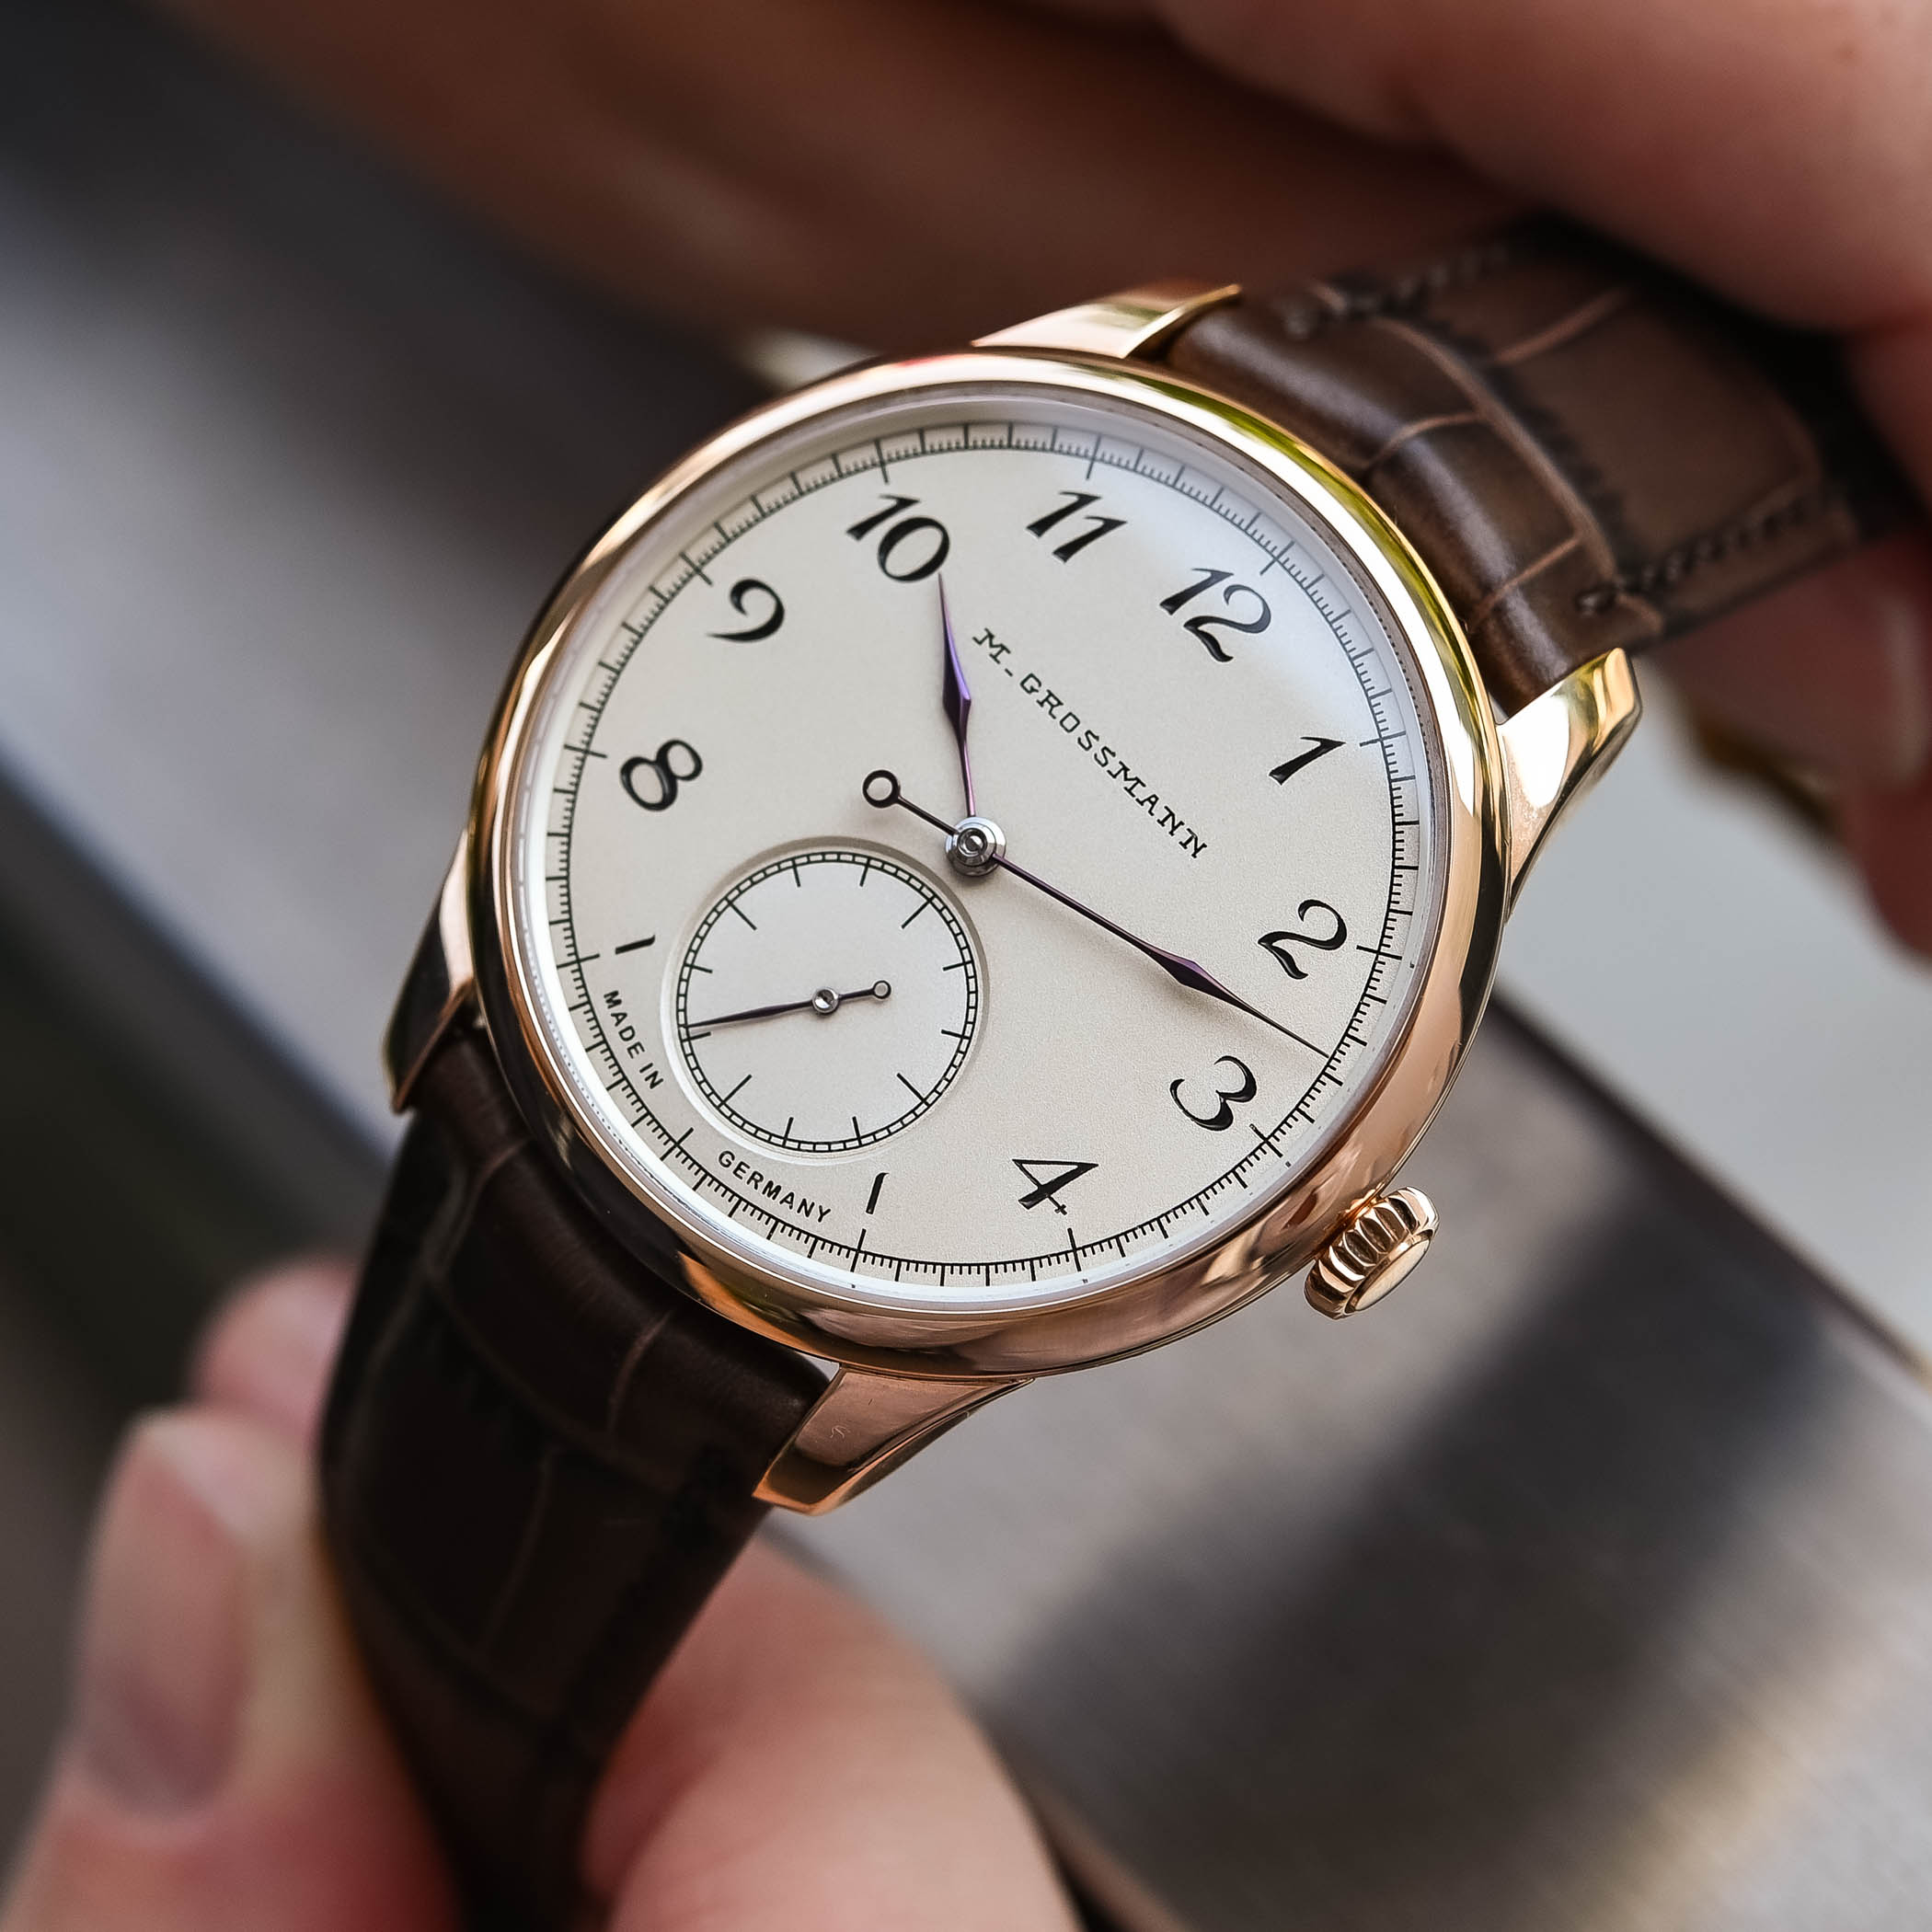 Moritz Grossmann Tefnut Silver-Plated by Friction Rose Gold - Hands-on Review - 8